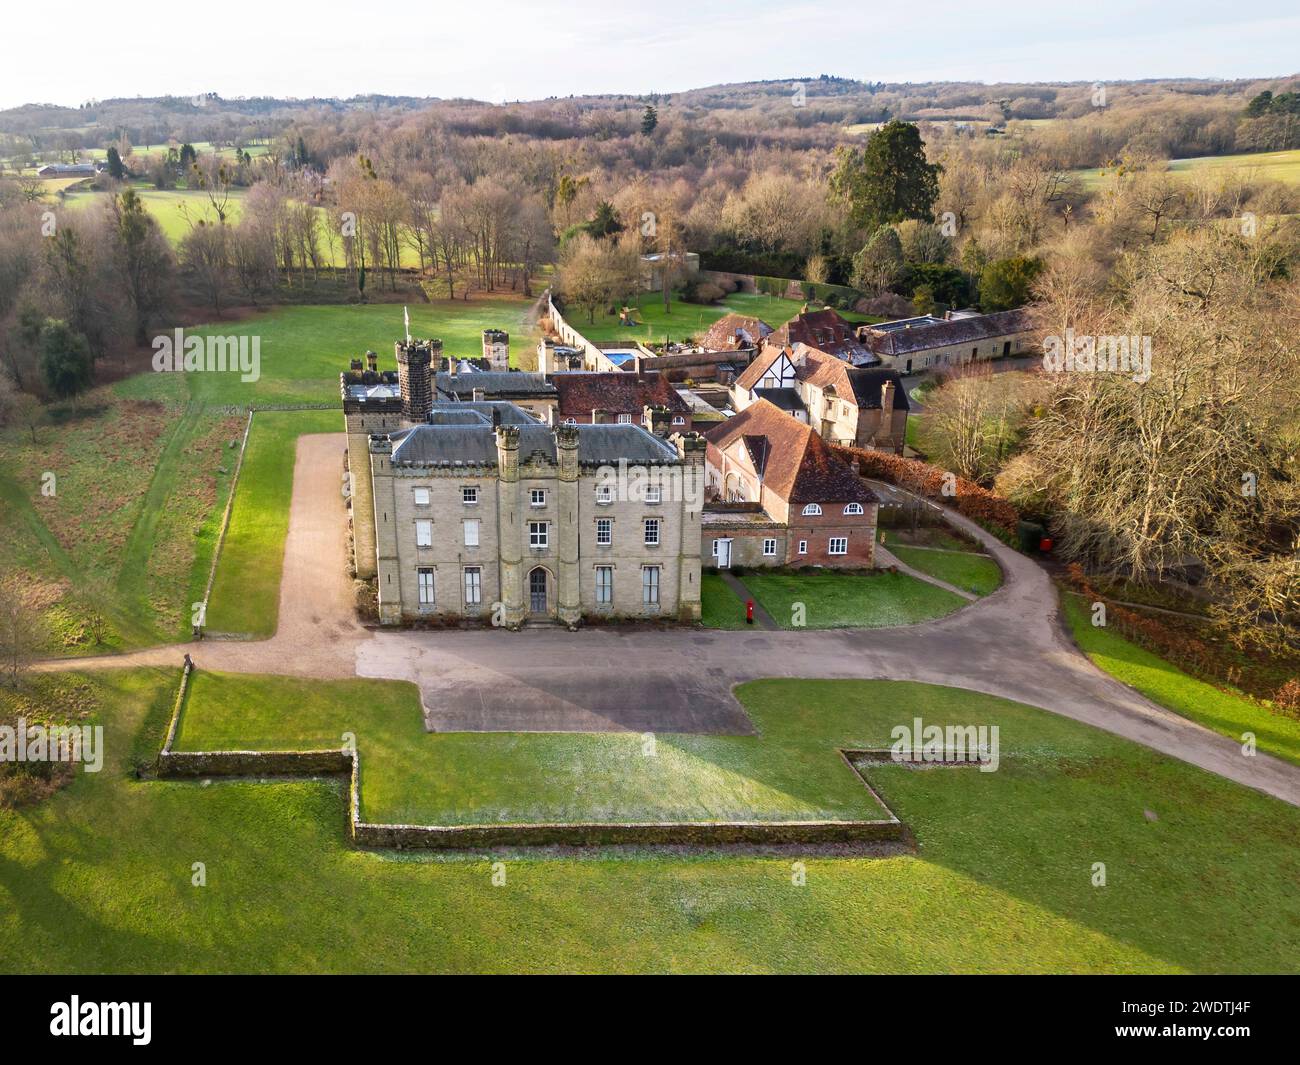 chiddingstone castle is a 17th century house in chiddingstone kent. A fine house and fishing lake in the grounds Stock Photo